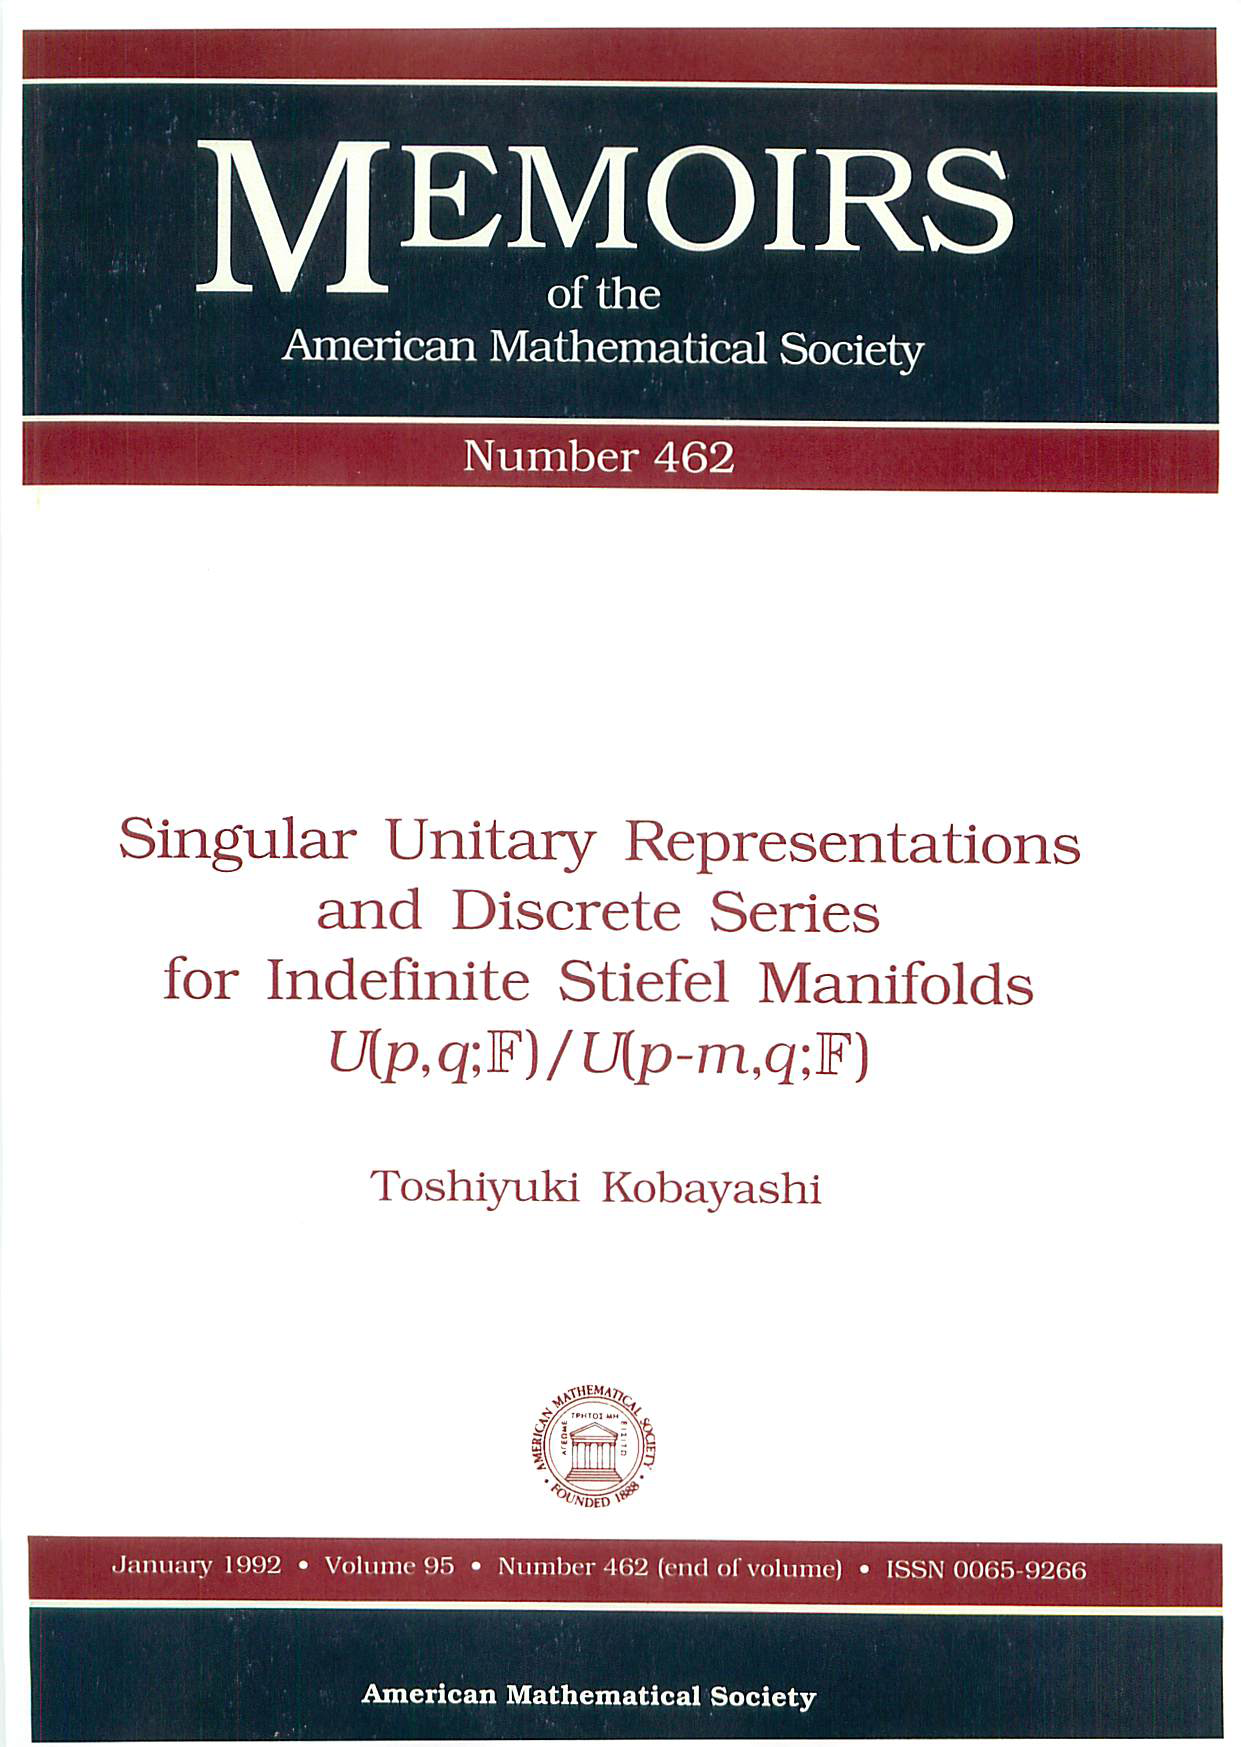 Singular Unitary Representations and Discrete Series for Indefinite Stiefel Manifolds